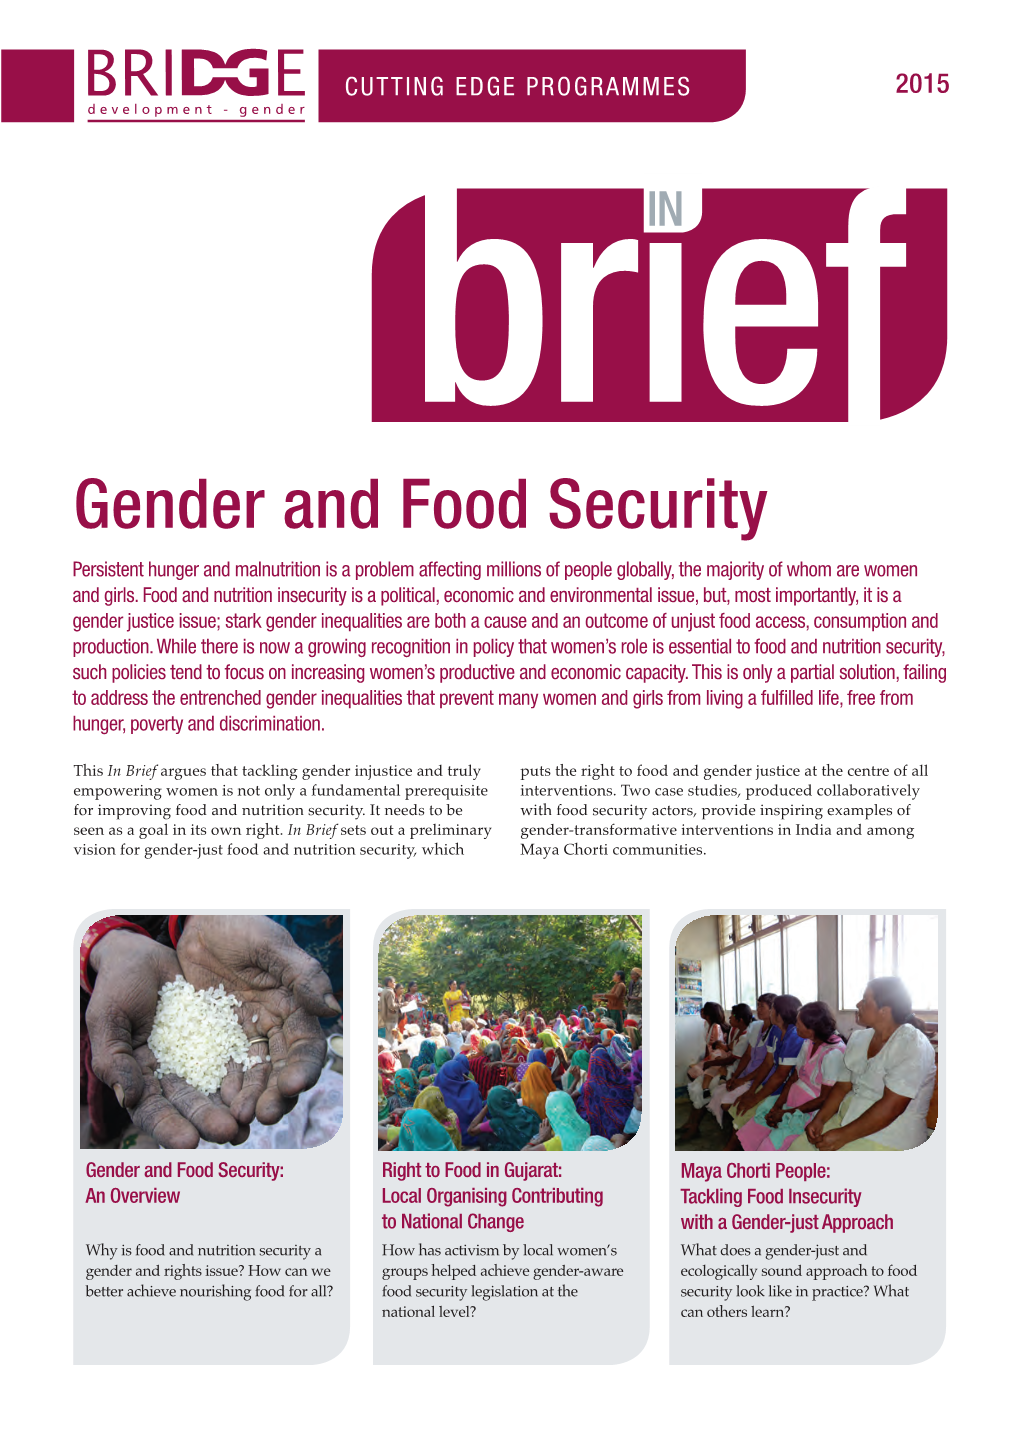 Gender and Food Security Persistent Hunger and Malnutrition Is a Problem Affecting Millions of People Globally, the Majority of Whom Are Women and Girls